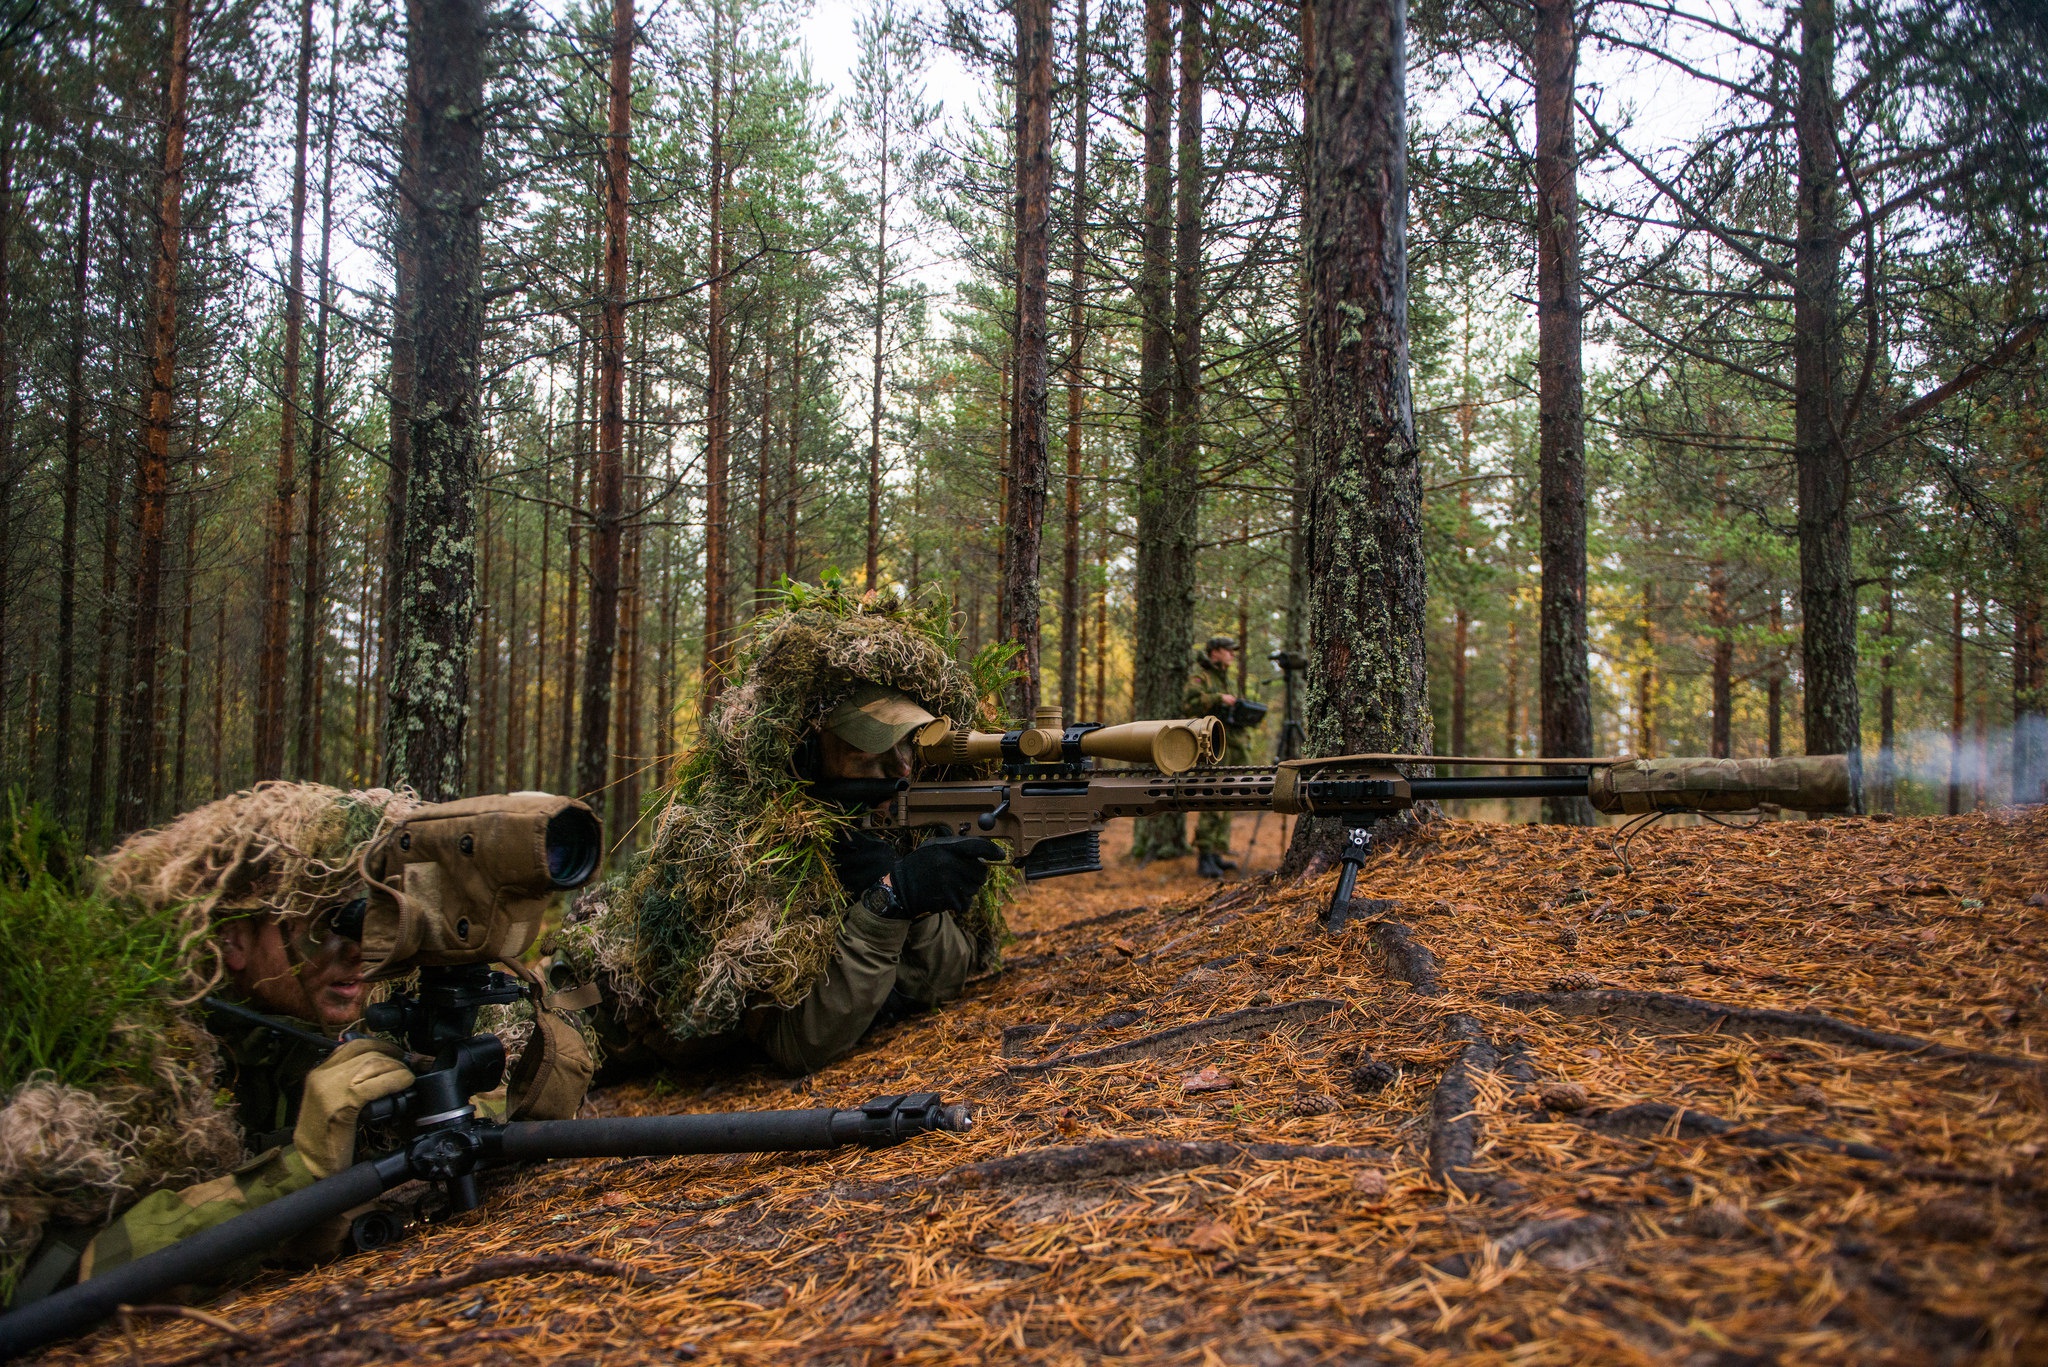 Camouflage Sniper Sniper Rifle Soldier 2048x1367